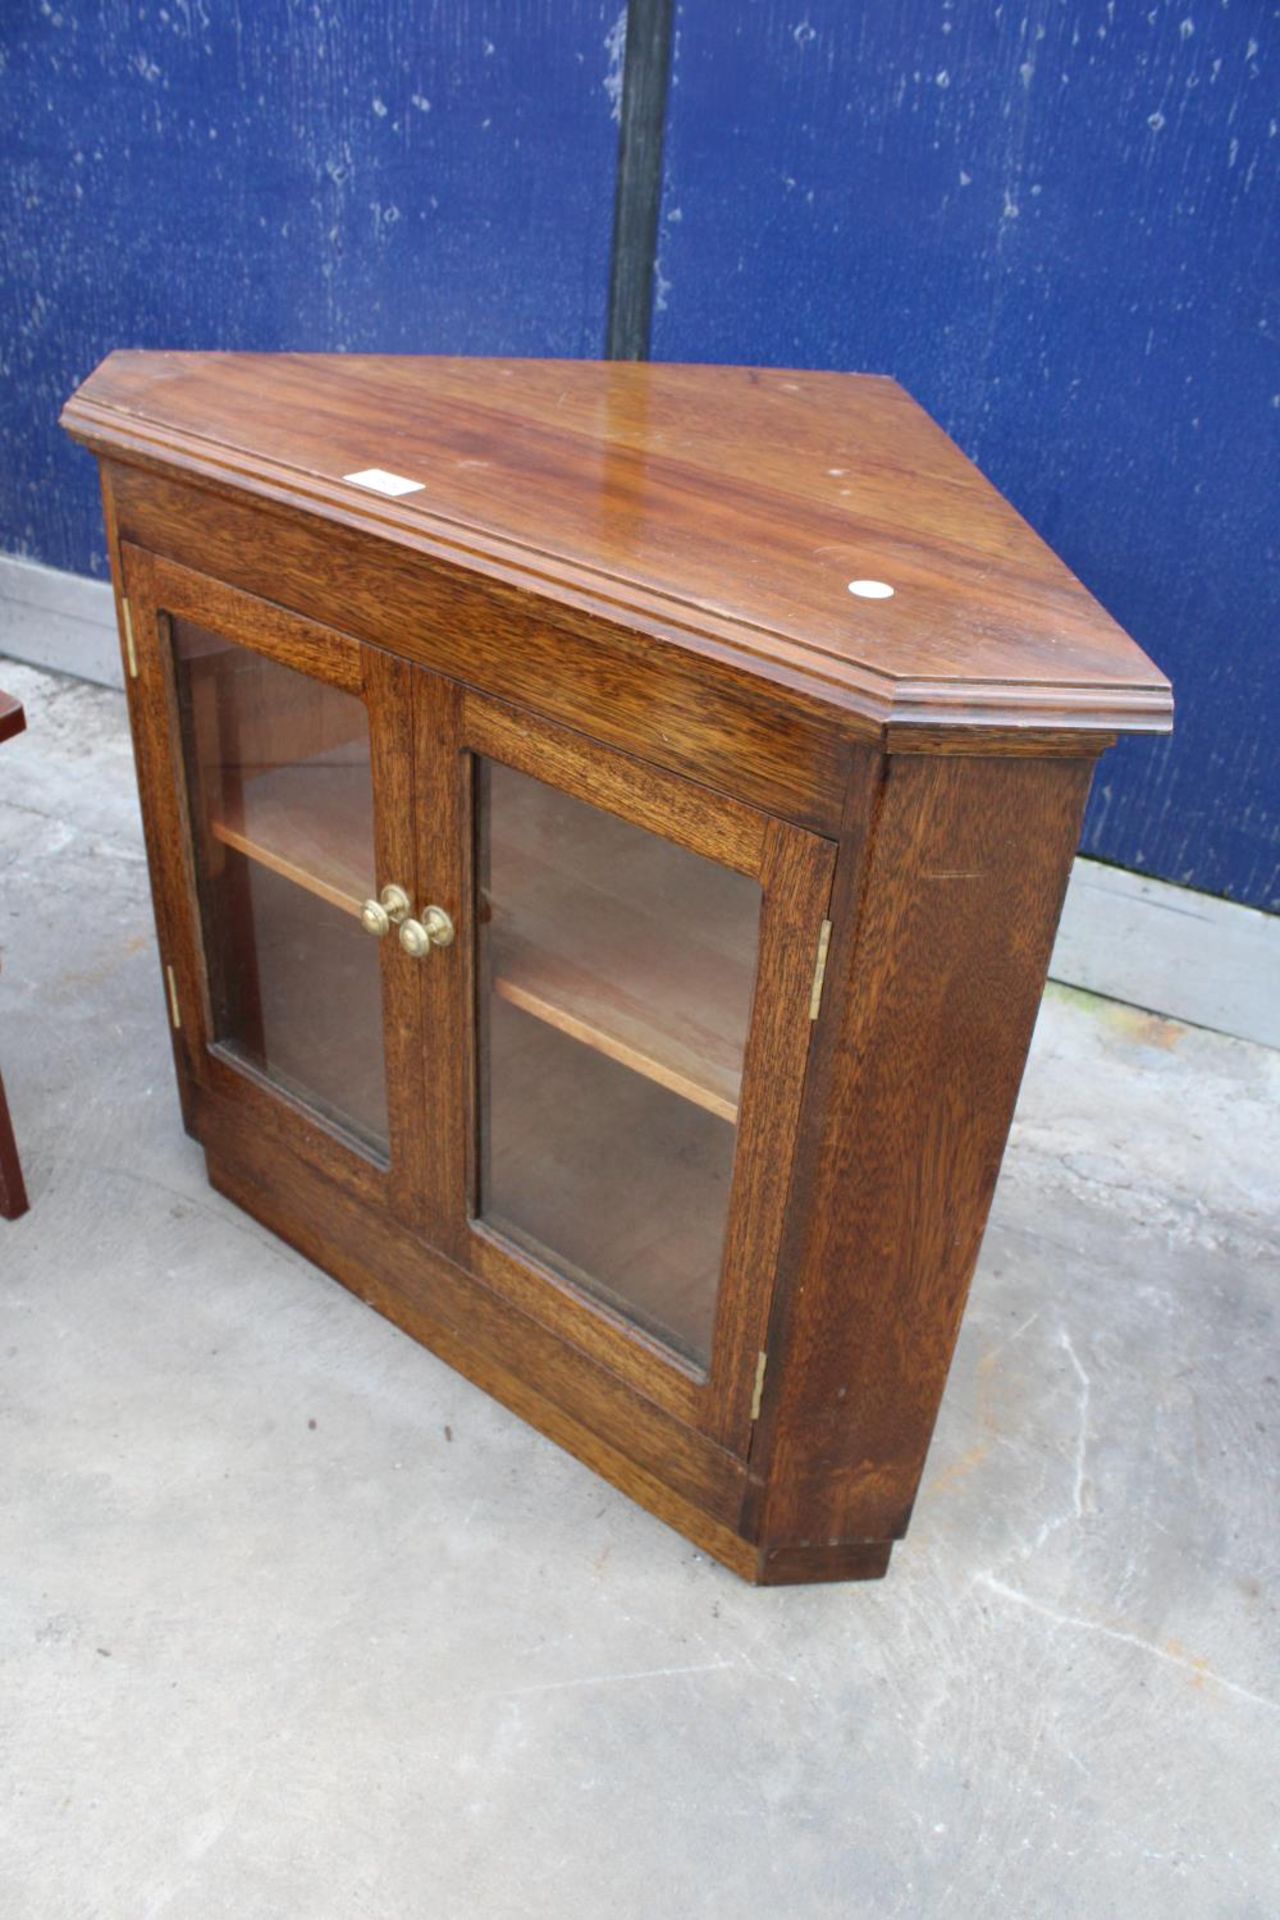 A GORDON WARR CONTRASTING HARDWOOD COFFEE TABLE AND AN OAK CORNER CABINET - Image 4 of 8